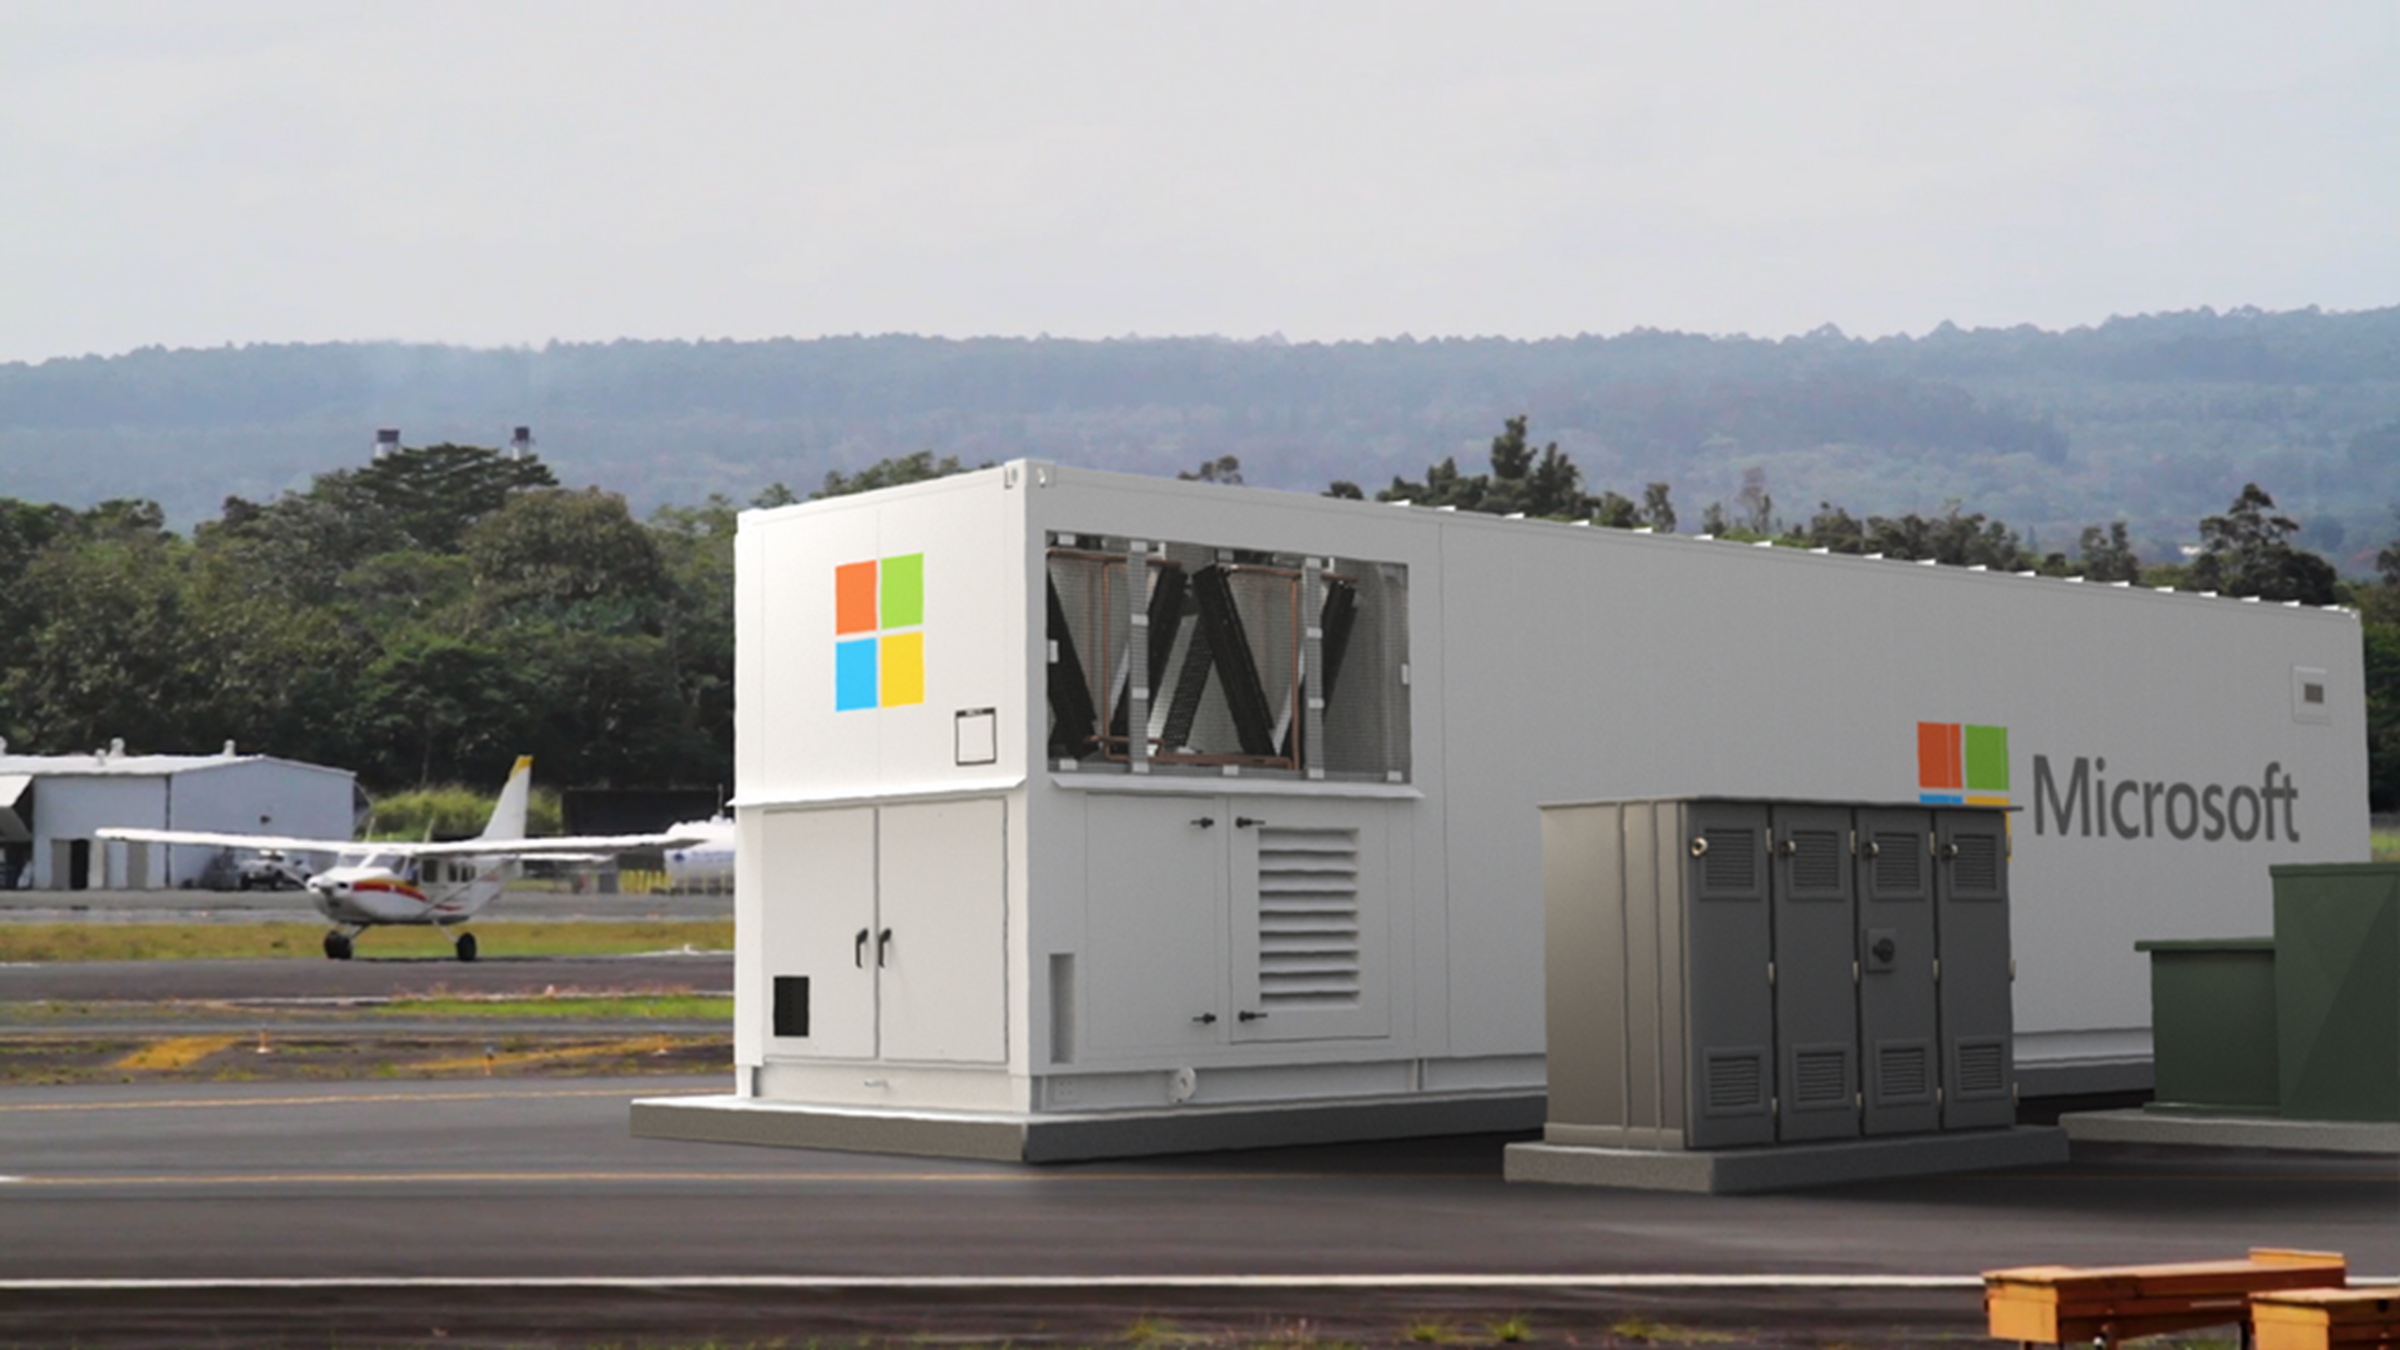 Microsoft’s data center will operate in a variety of environments.